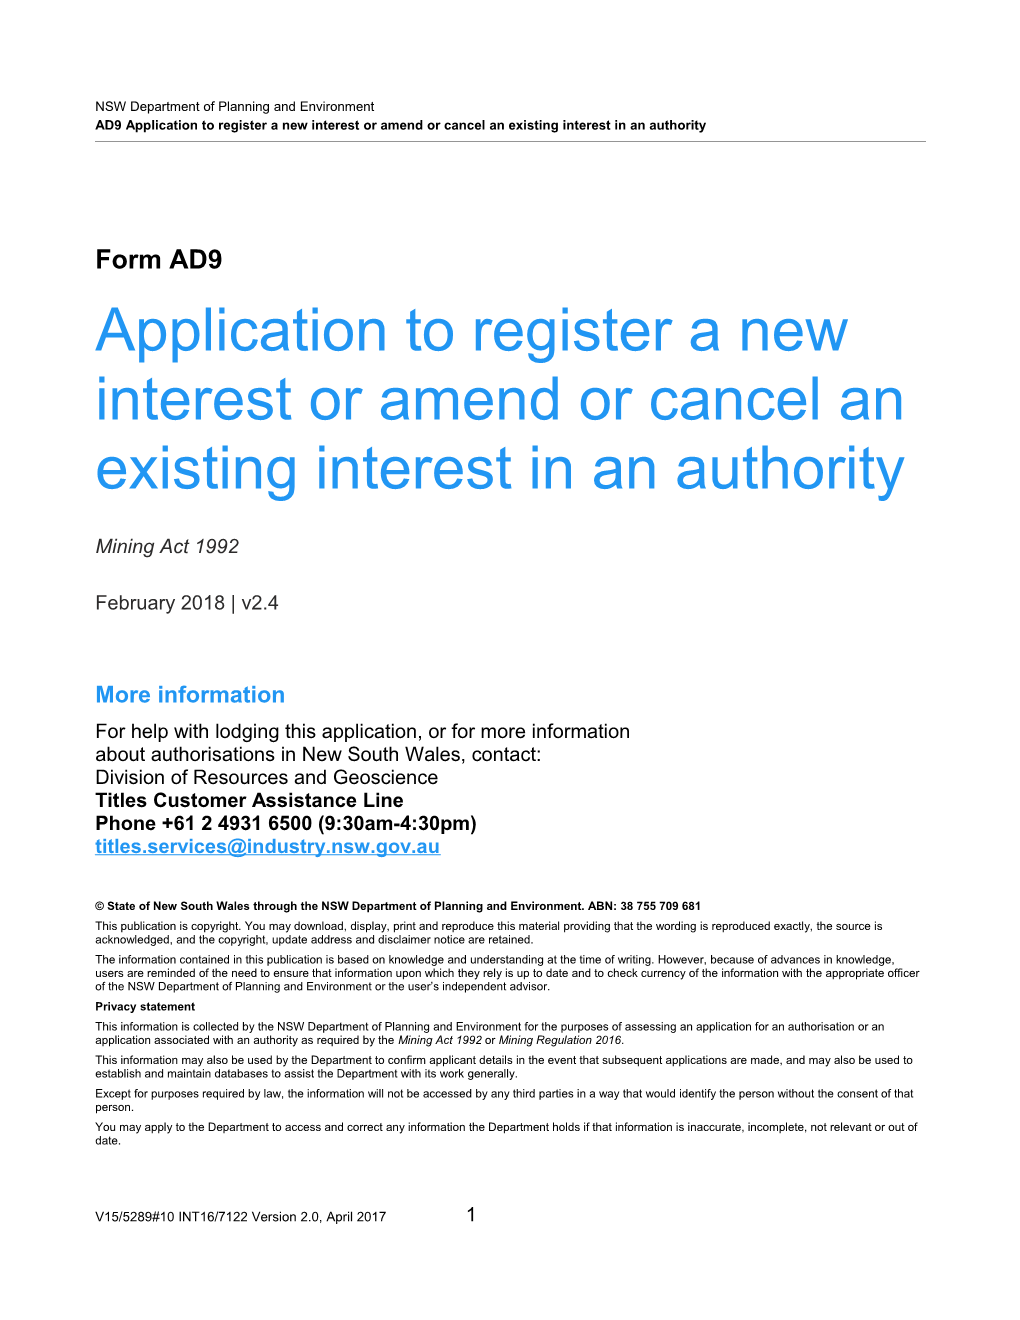 AD9 Application to Register a New Interest Or Amend Or Cancel an Existing Interest in An